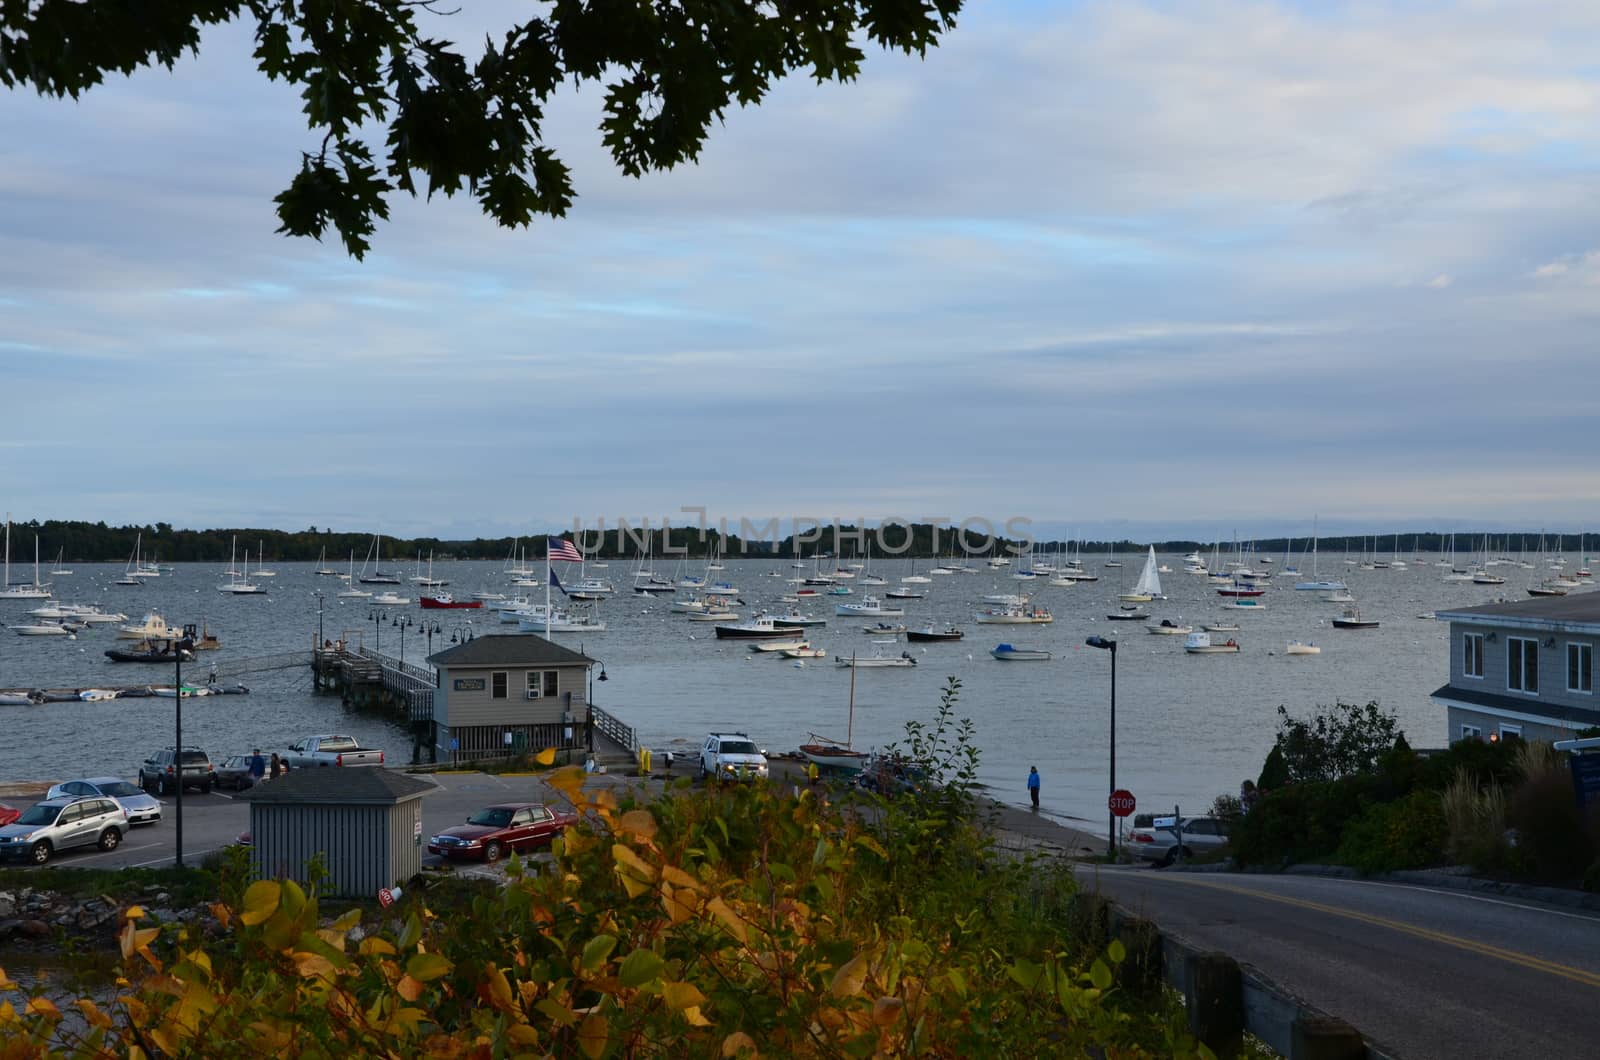 View of Falmouth Maine coastal area with boats moored.